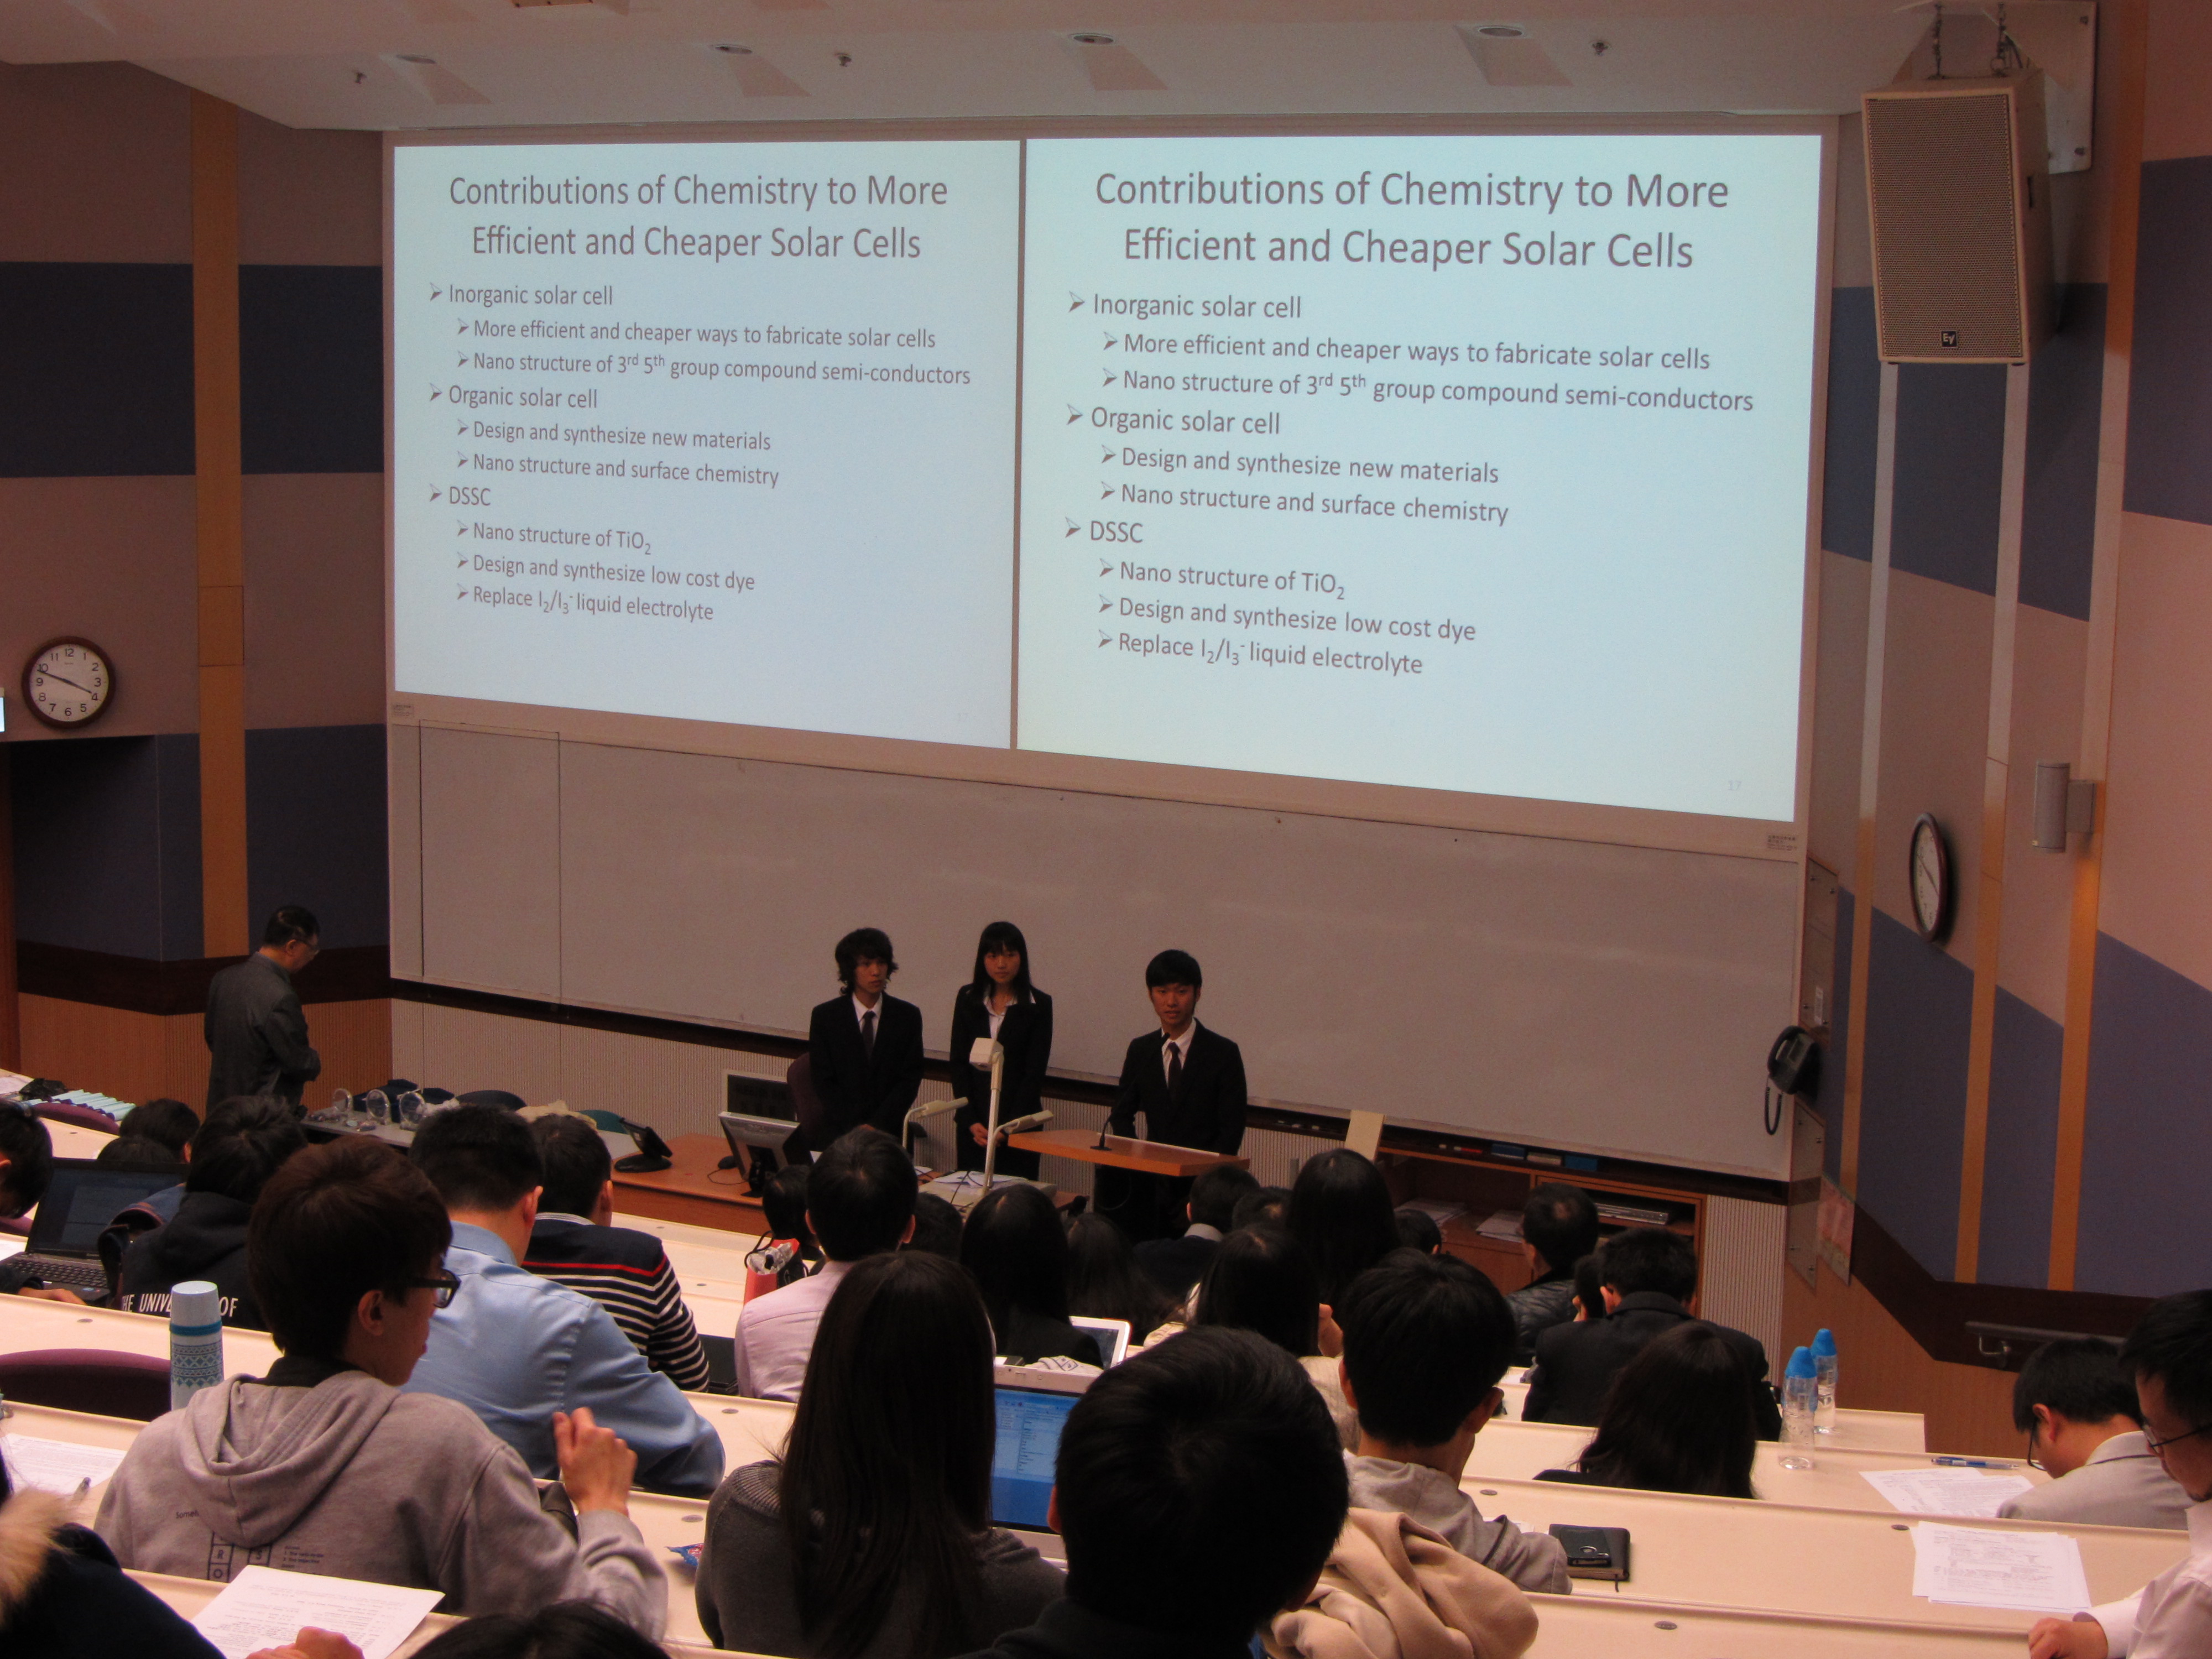 CUHK Team made a presentation about the contributions of chemistry to solar cell technology